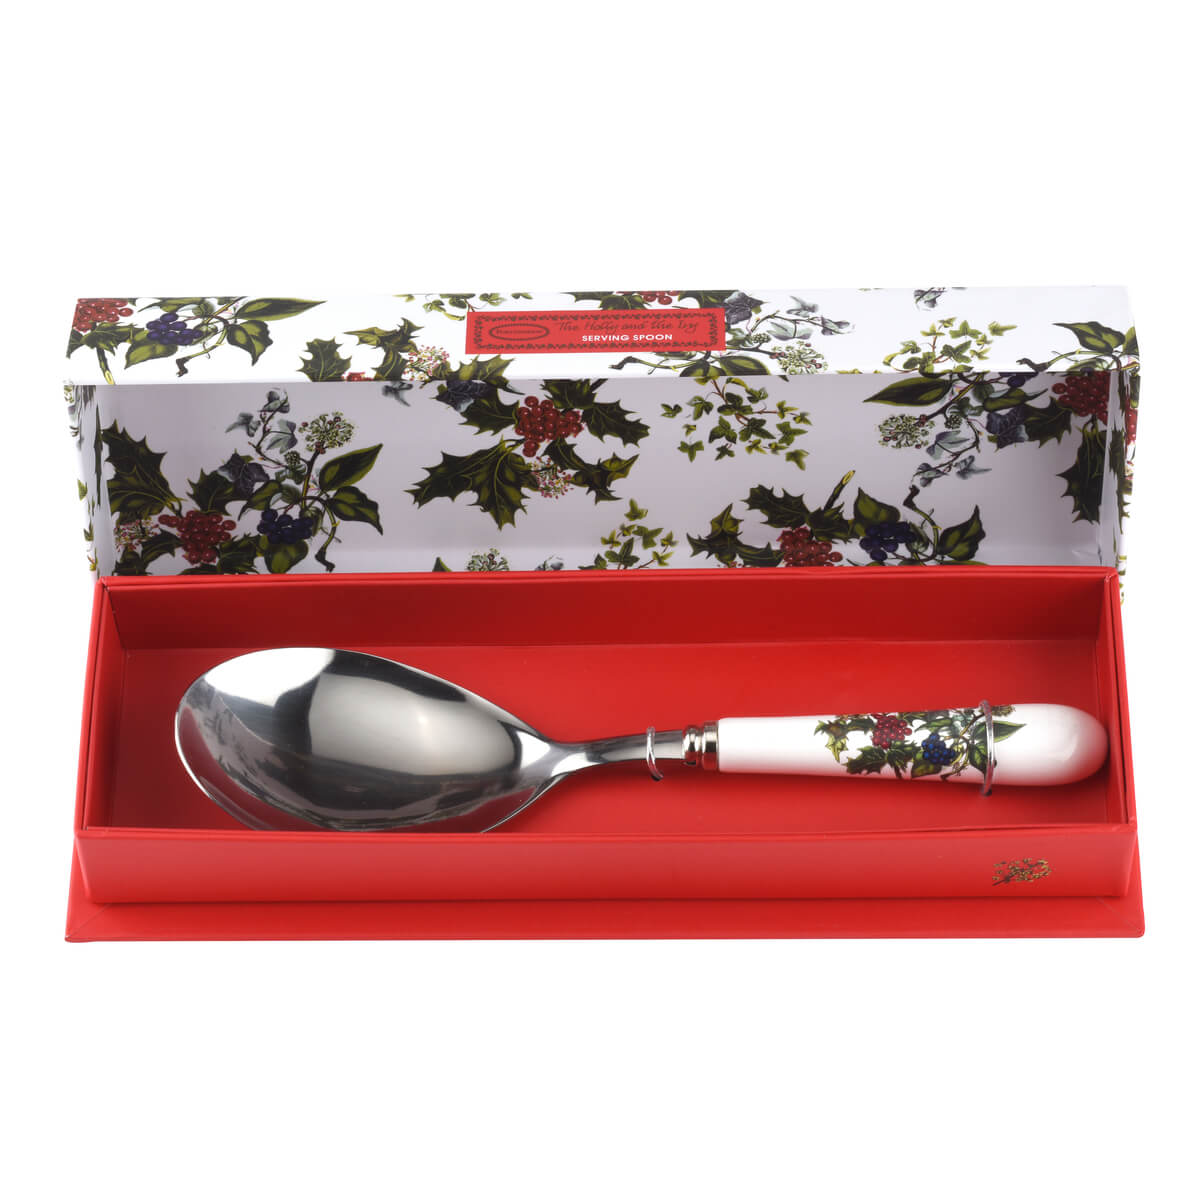 The Holly and the Ivy Large Serving Spoon